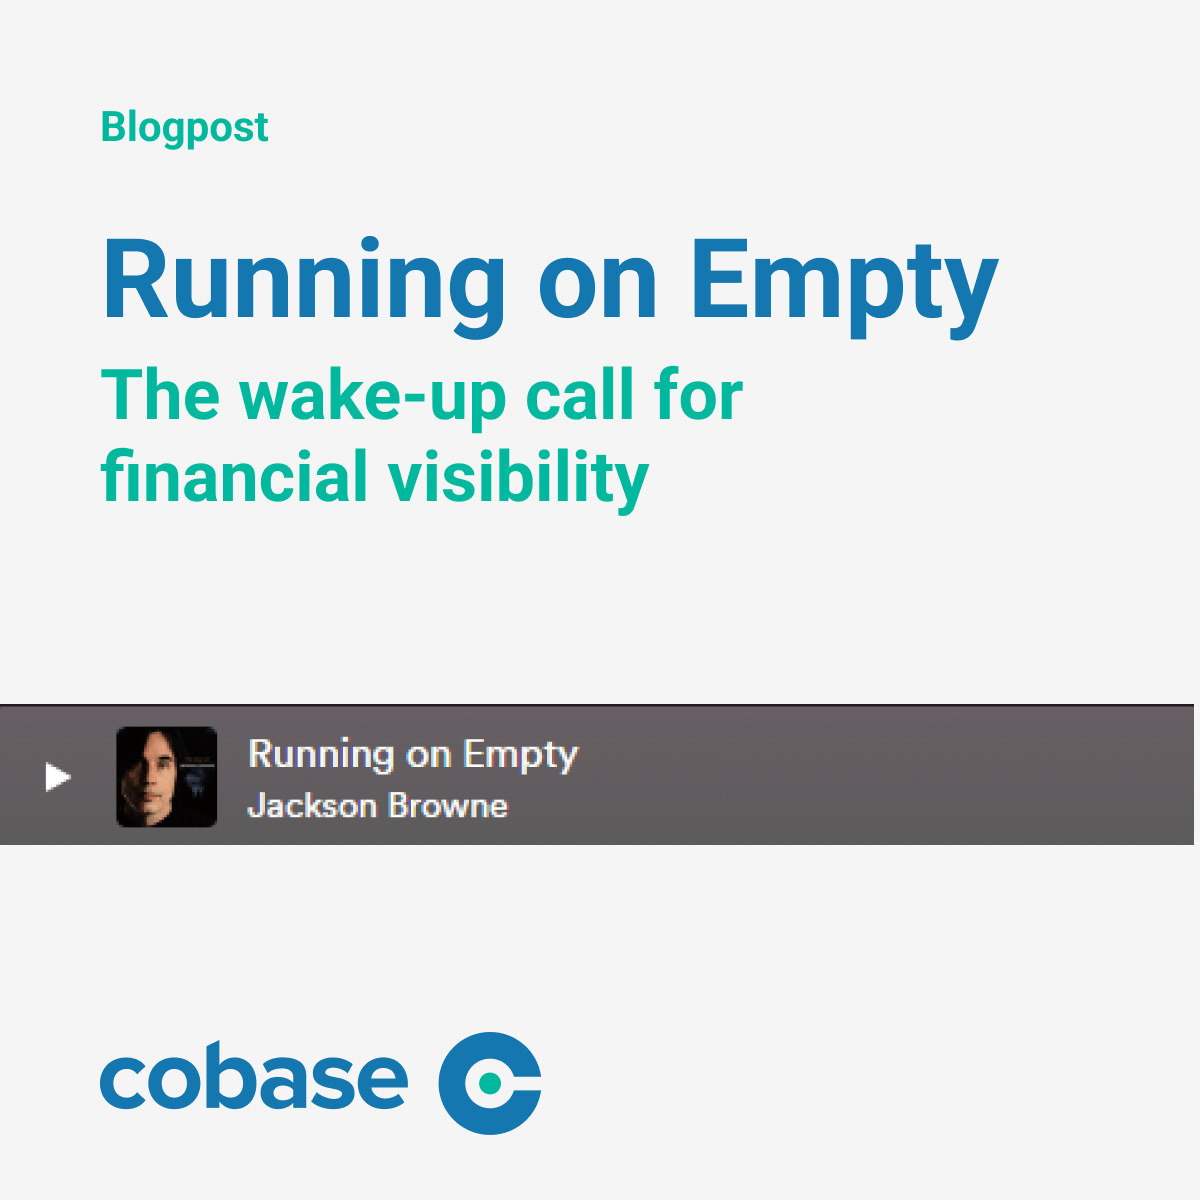 Running on Empty: The wake-up call for financial visibility